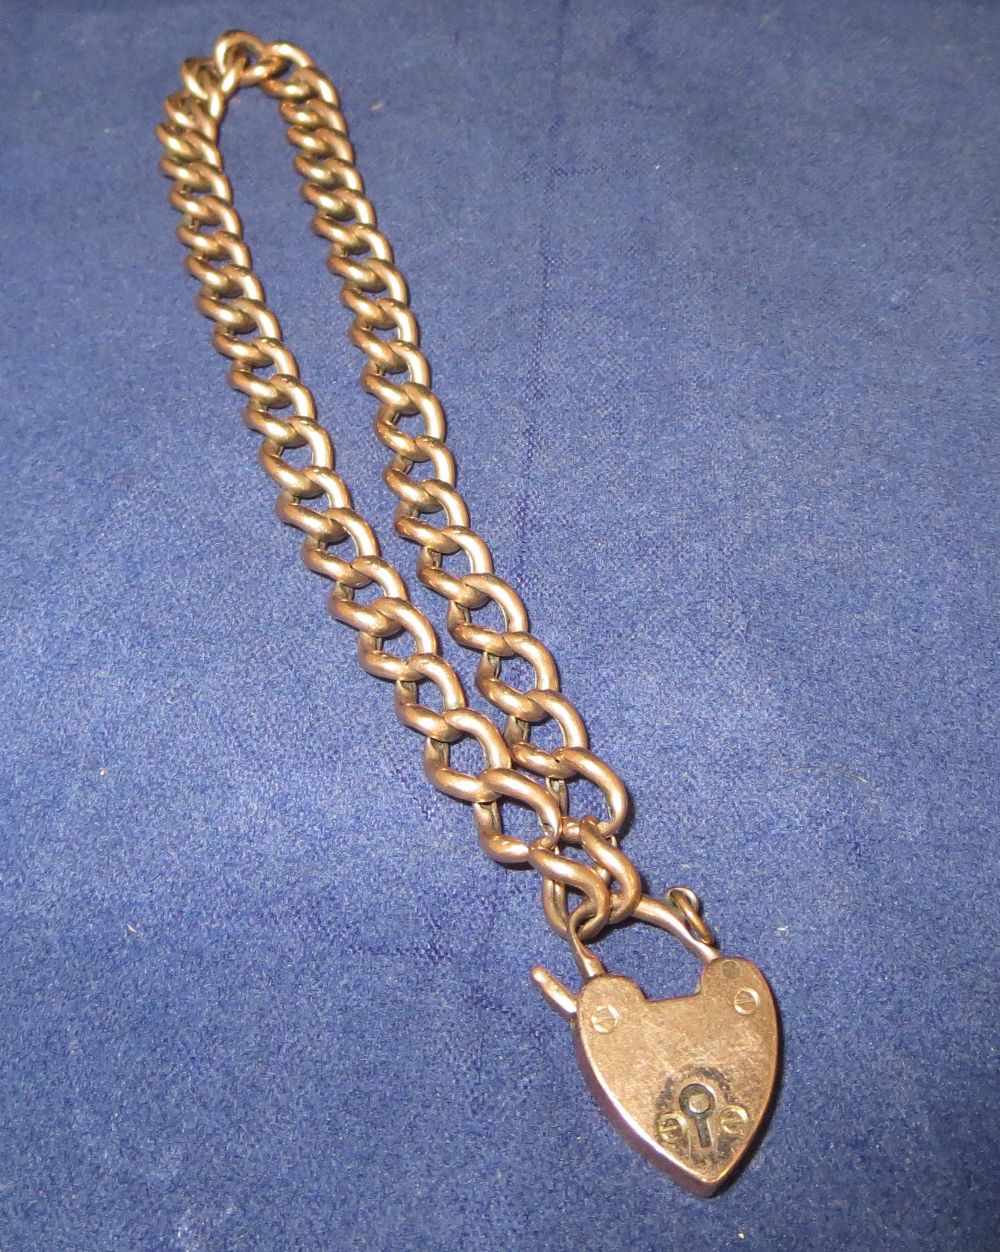 A yellow metal chain bracelet (unmarked) with a 9 carat hallmarked gold heart lock